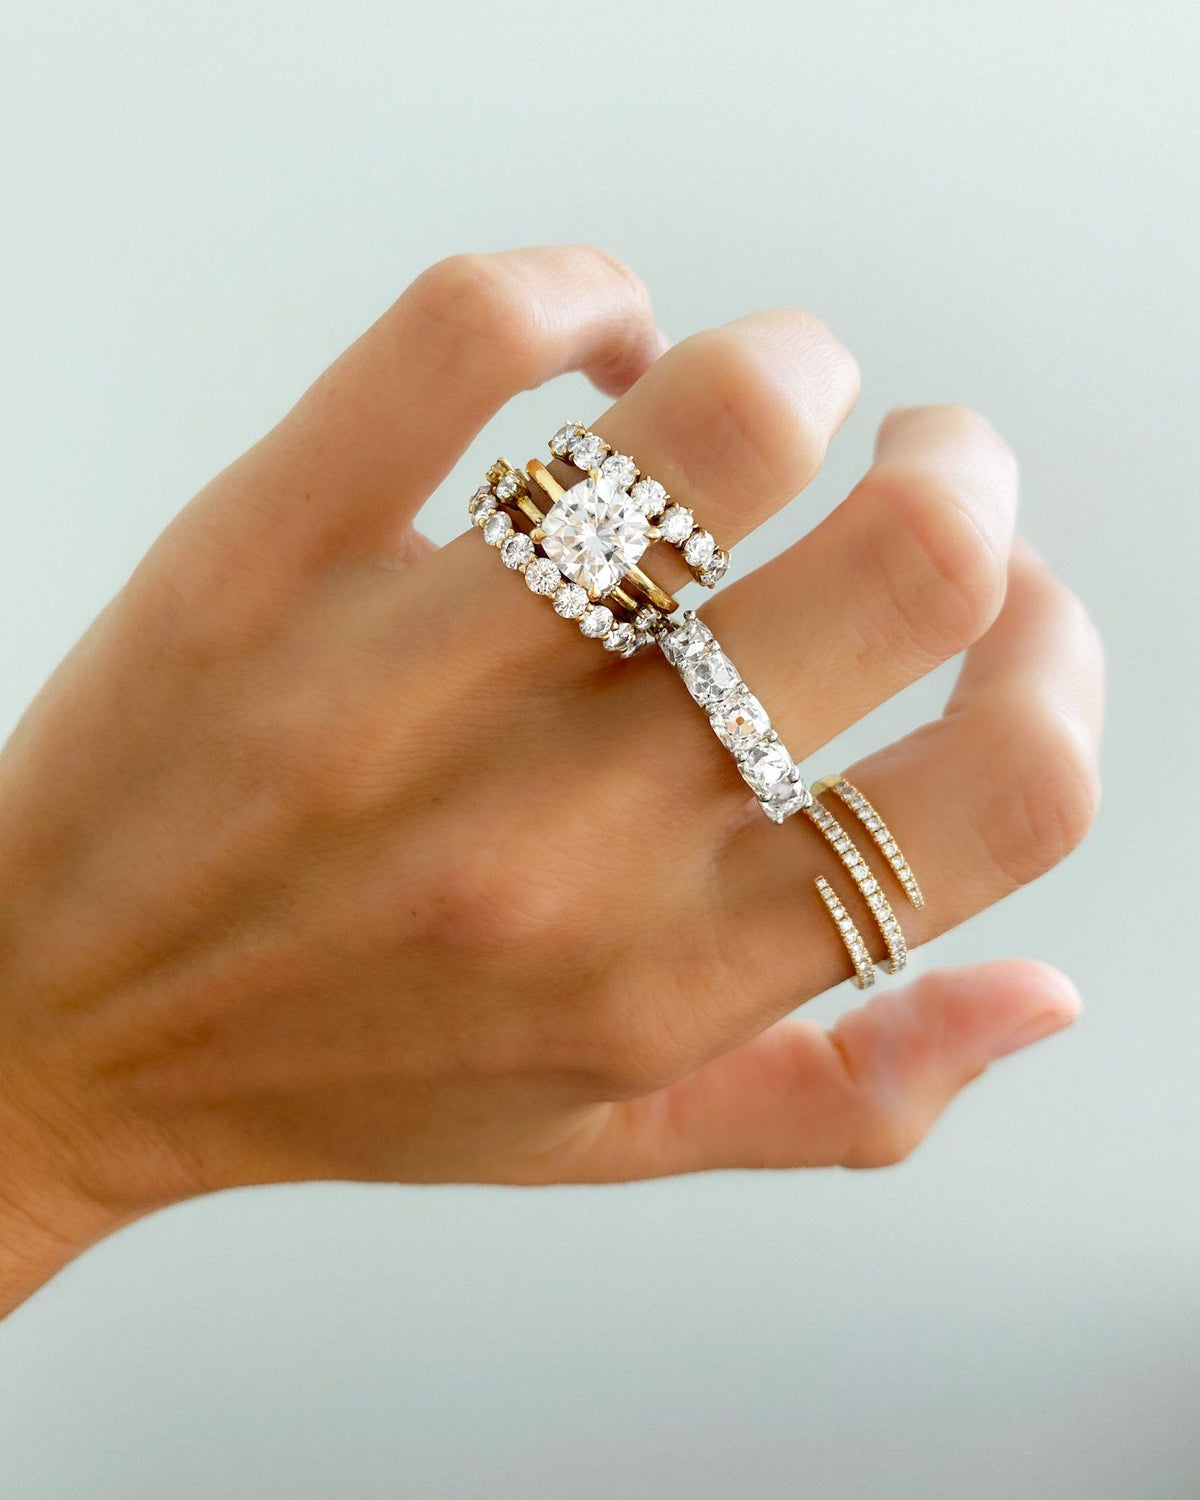 Pavé Diamond Wrap Ring by Good Stone available in Gold and Platinum